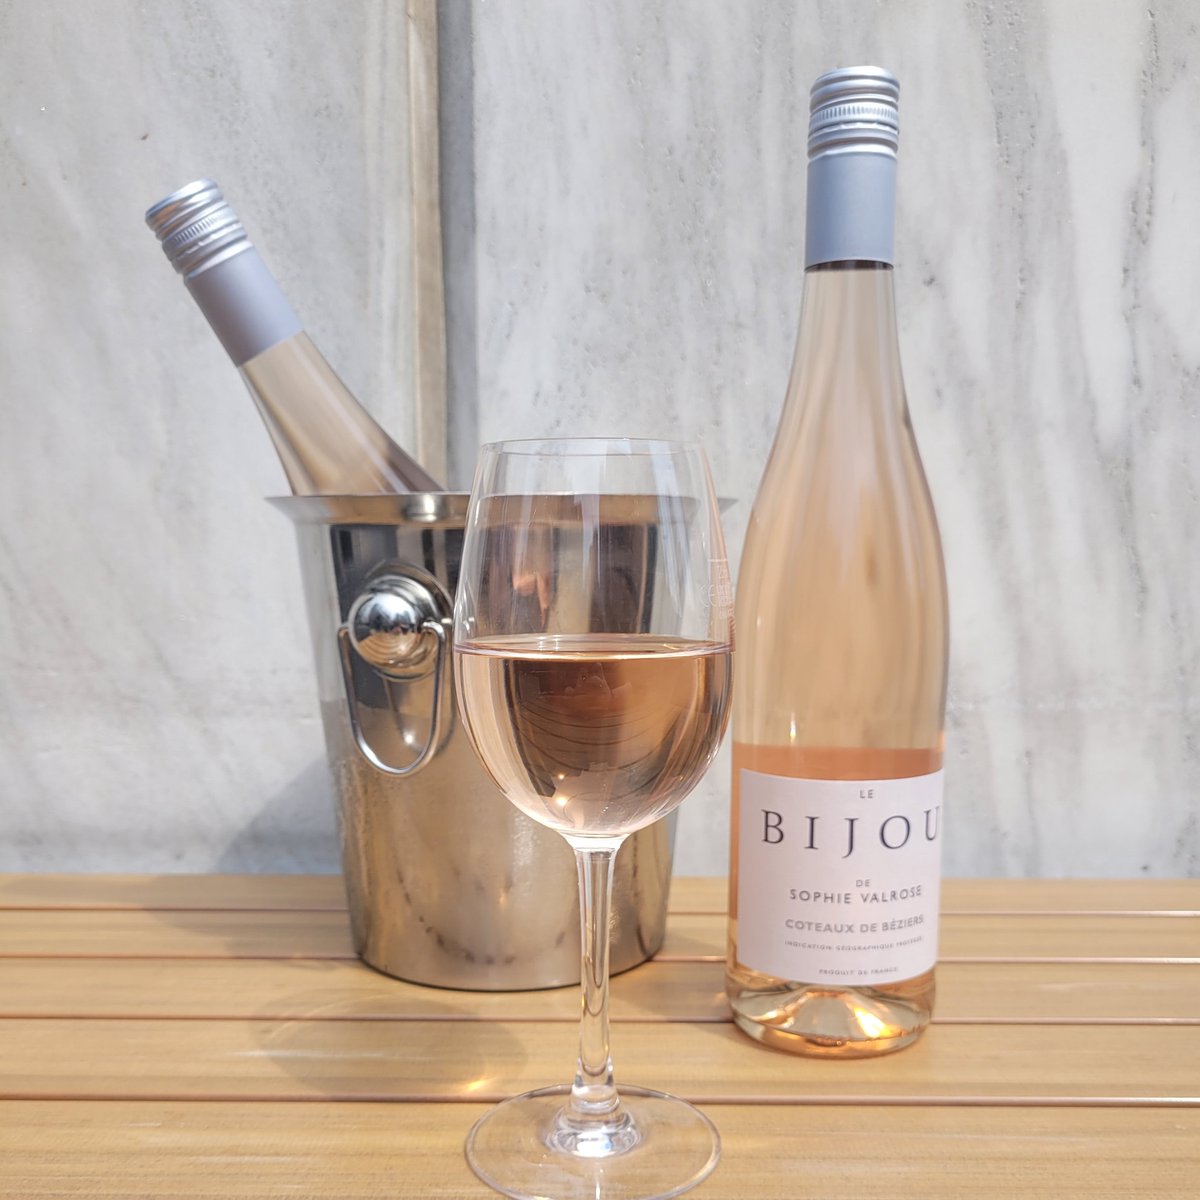 Our Bijou rosé is the #wineoftheweek at The Henry. You could say it's the jewel of the wine selection!